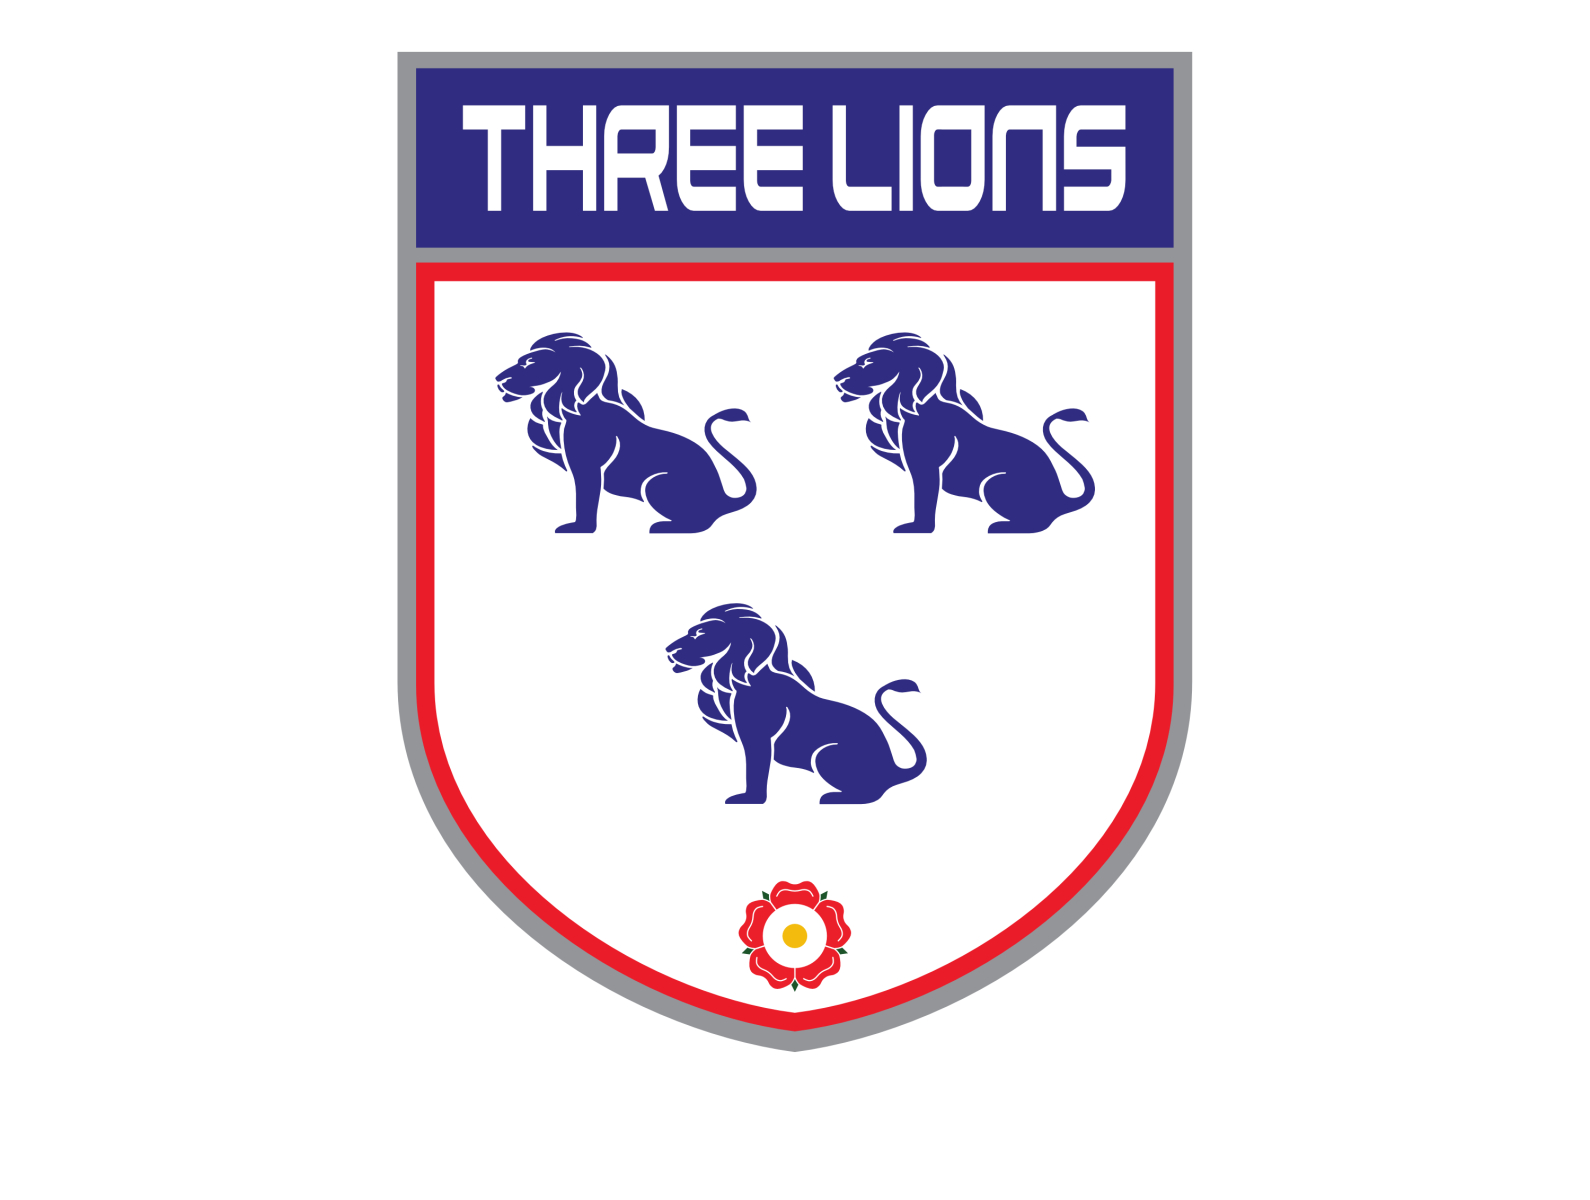 3 Lions, But What Does That Mean?